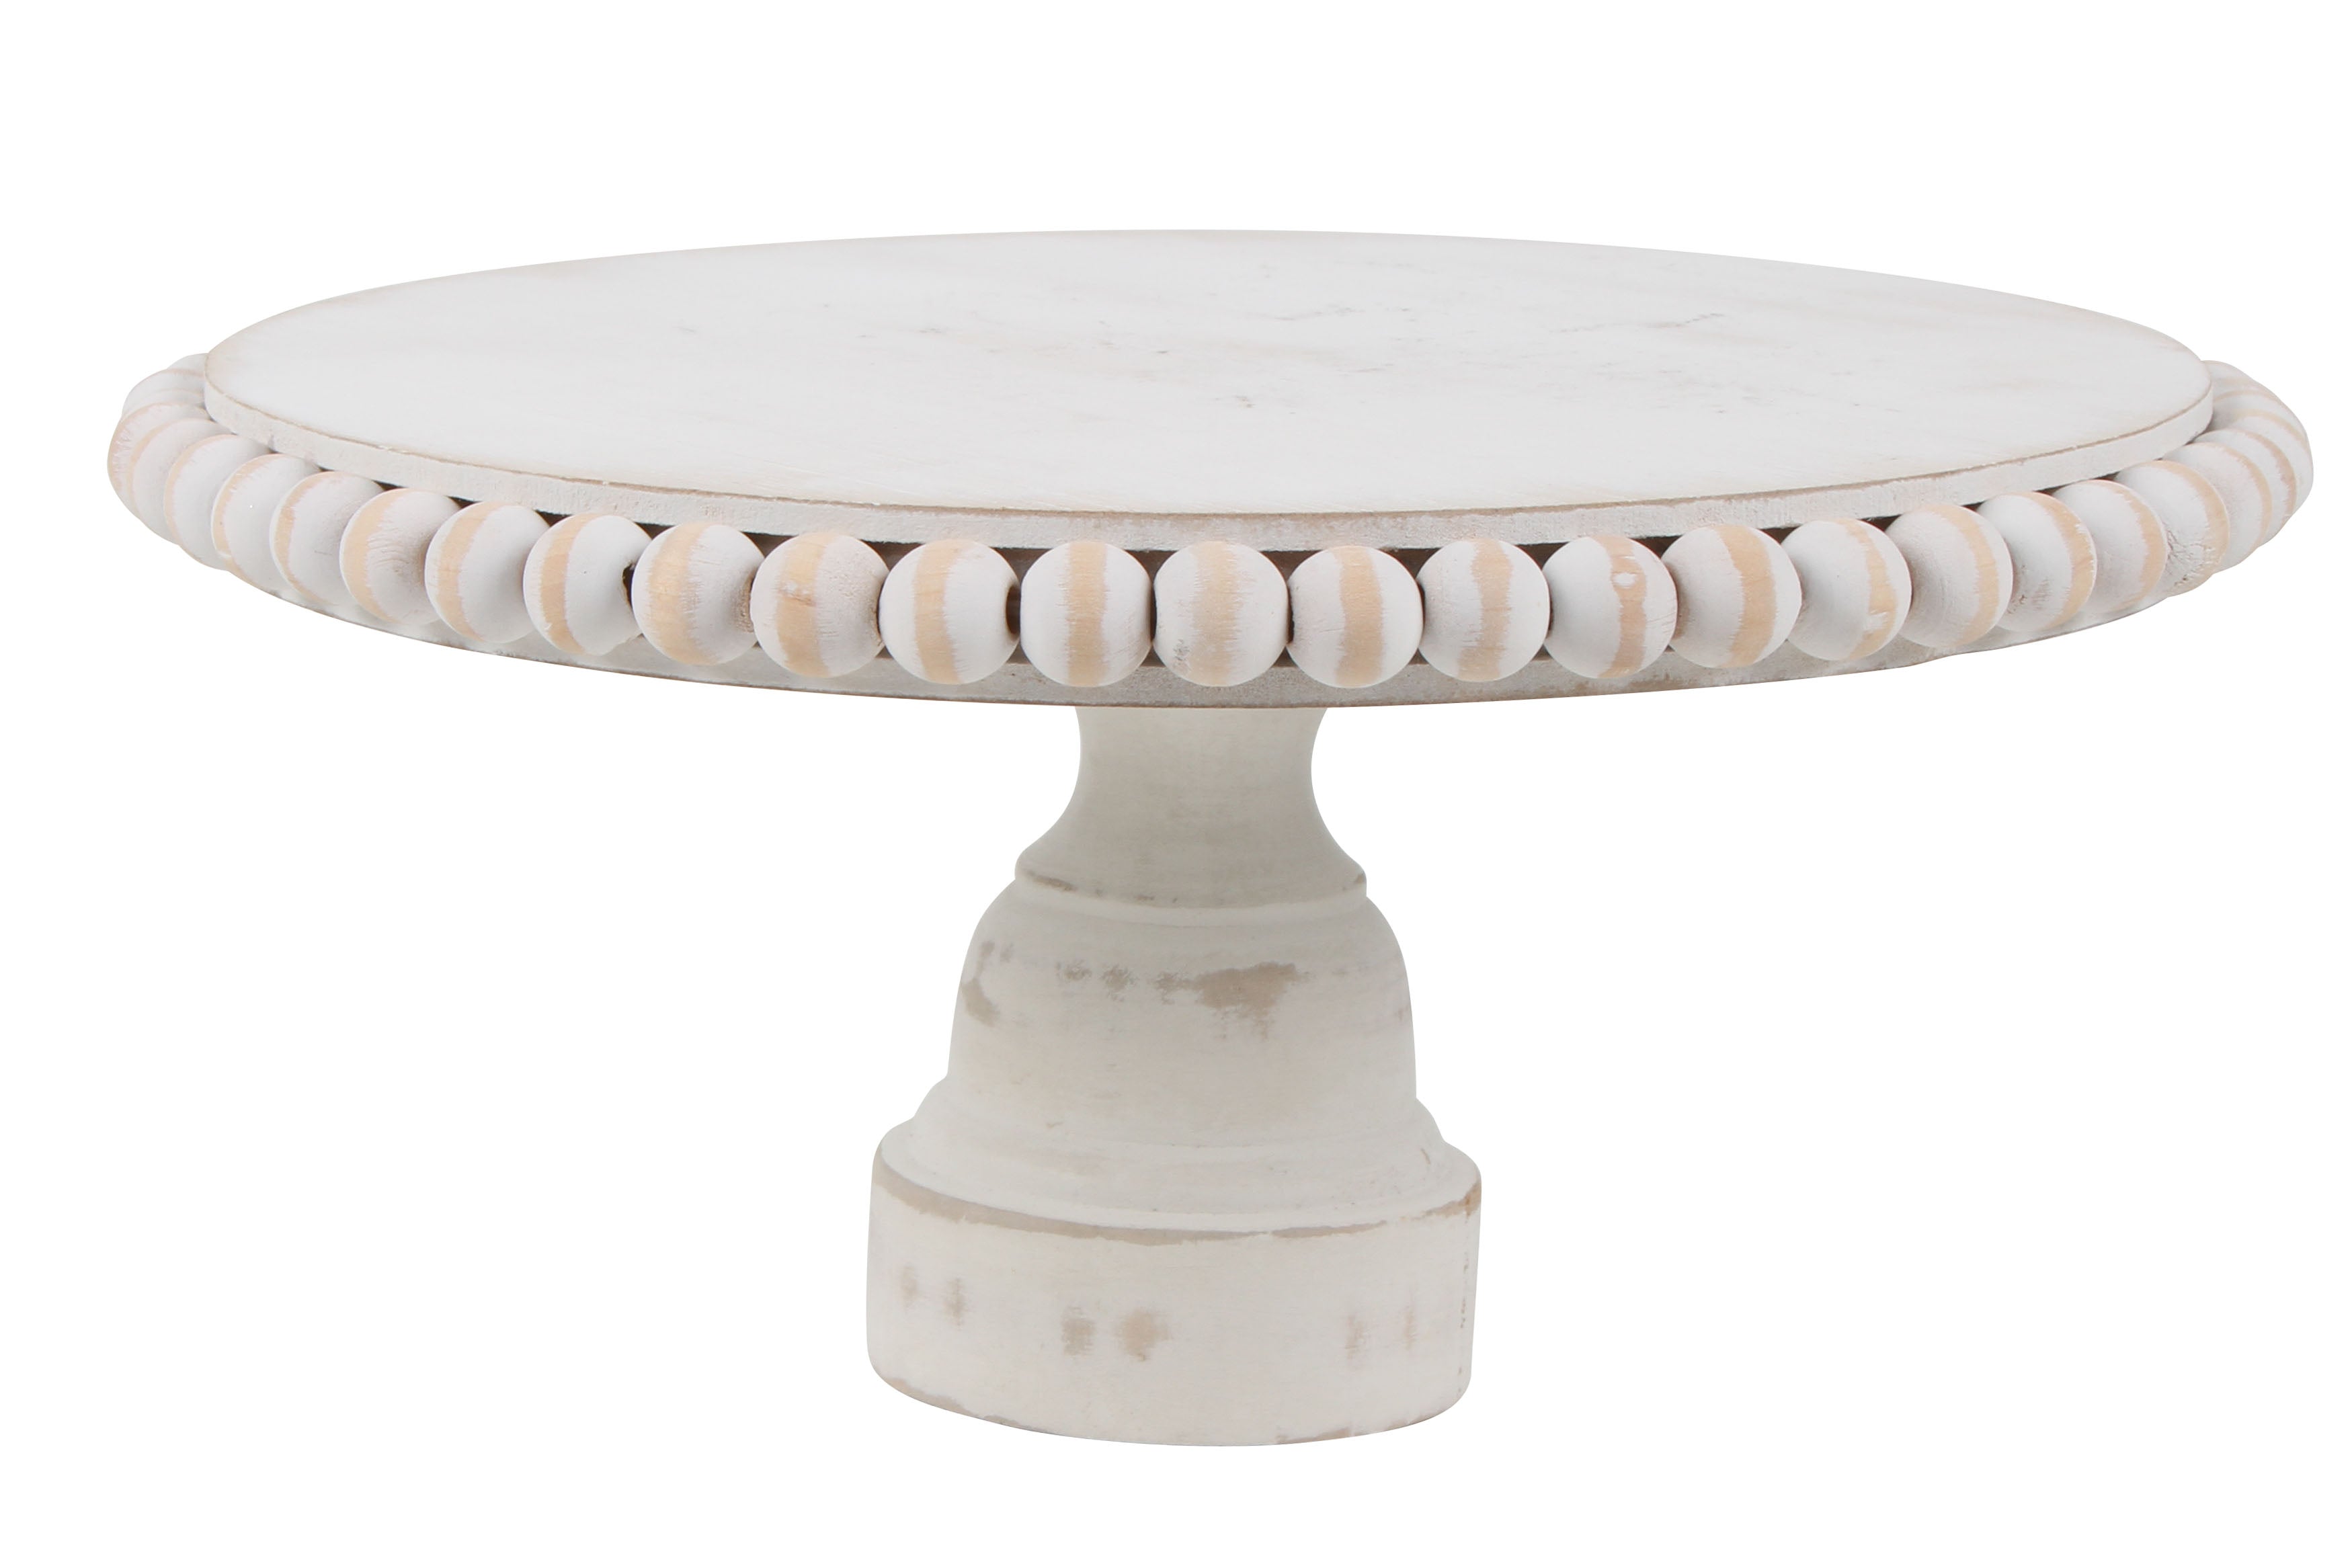 WOOD CAKE STAND WITH BEADED EDGE - 25X25X12CM